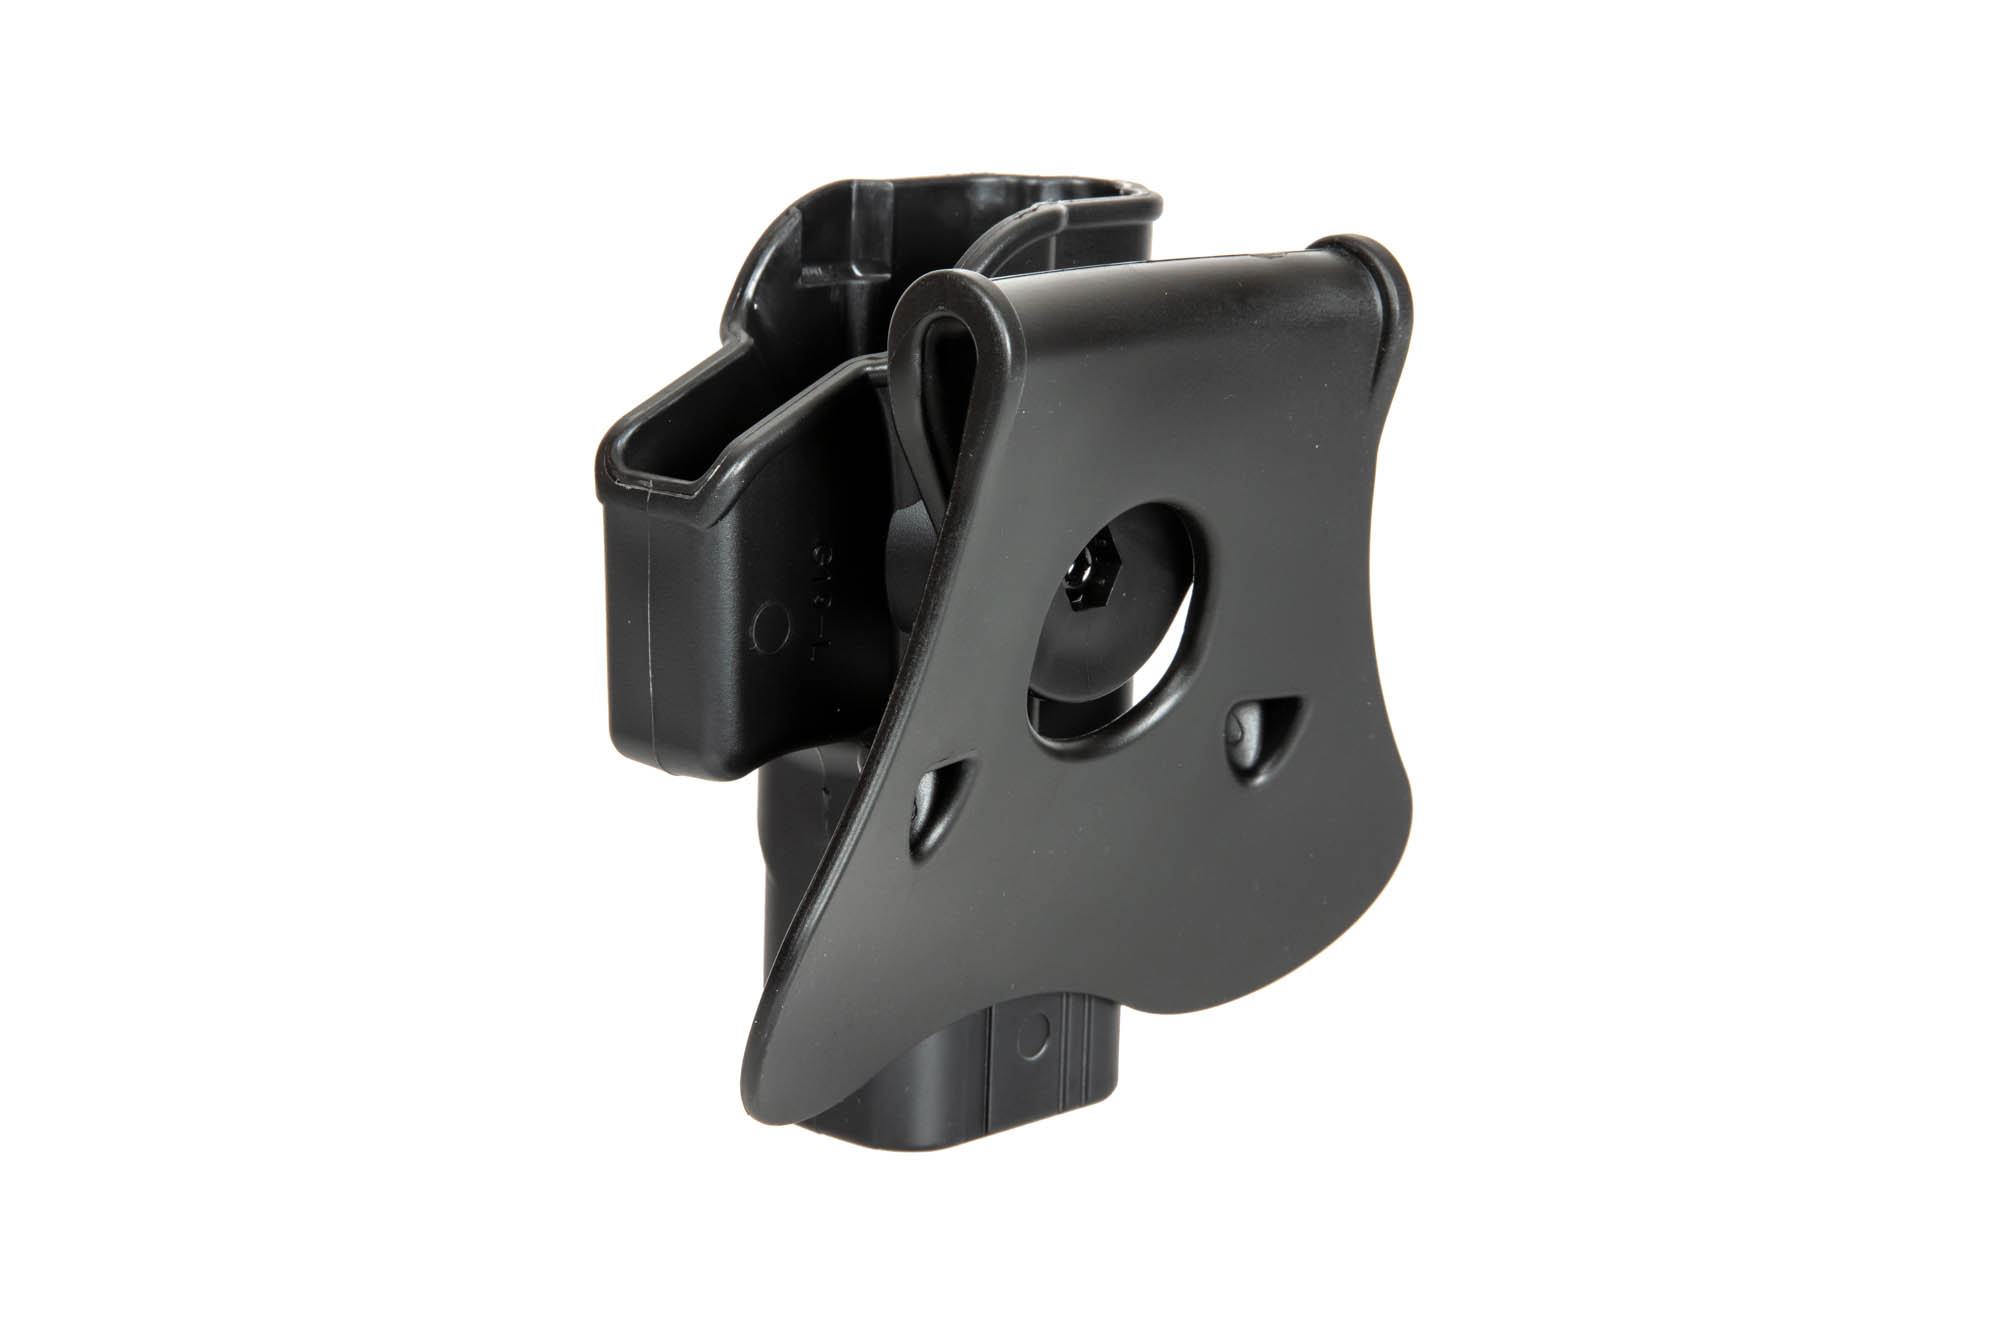 Holster for Glock 19/23/32 Replicas - Left Handed by Amomax on Airsoft Mania Europe